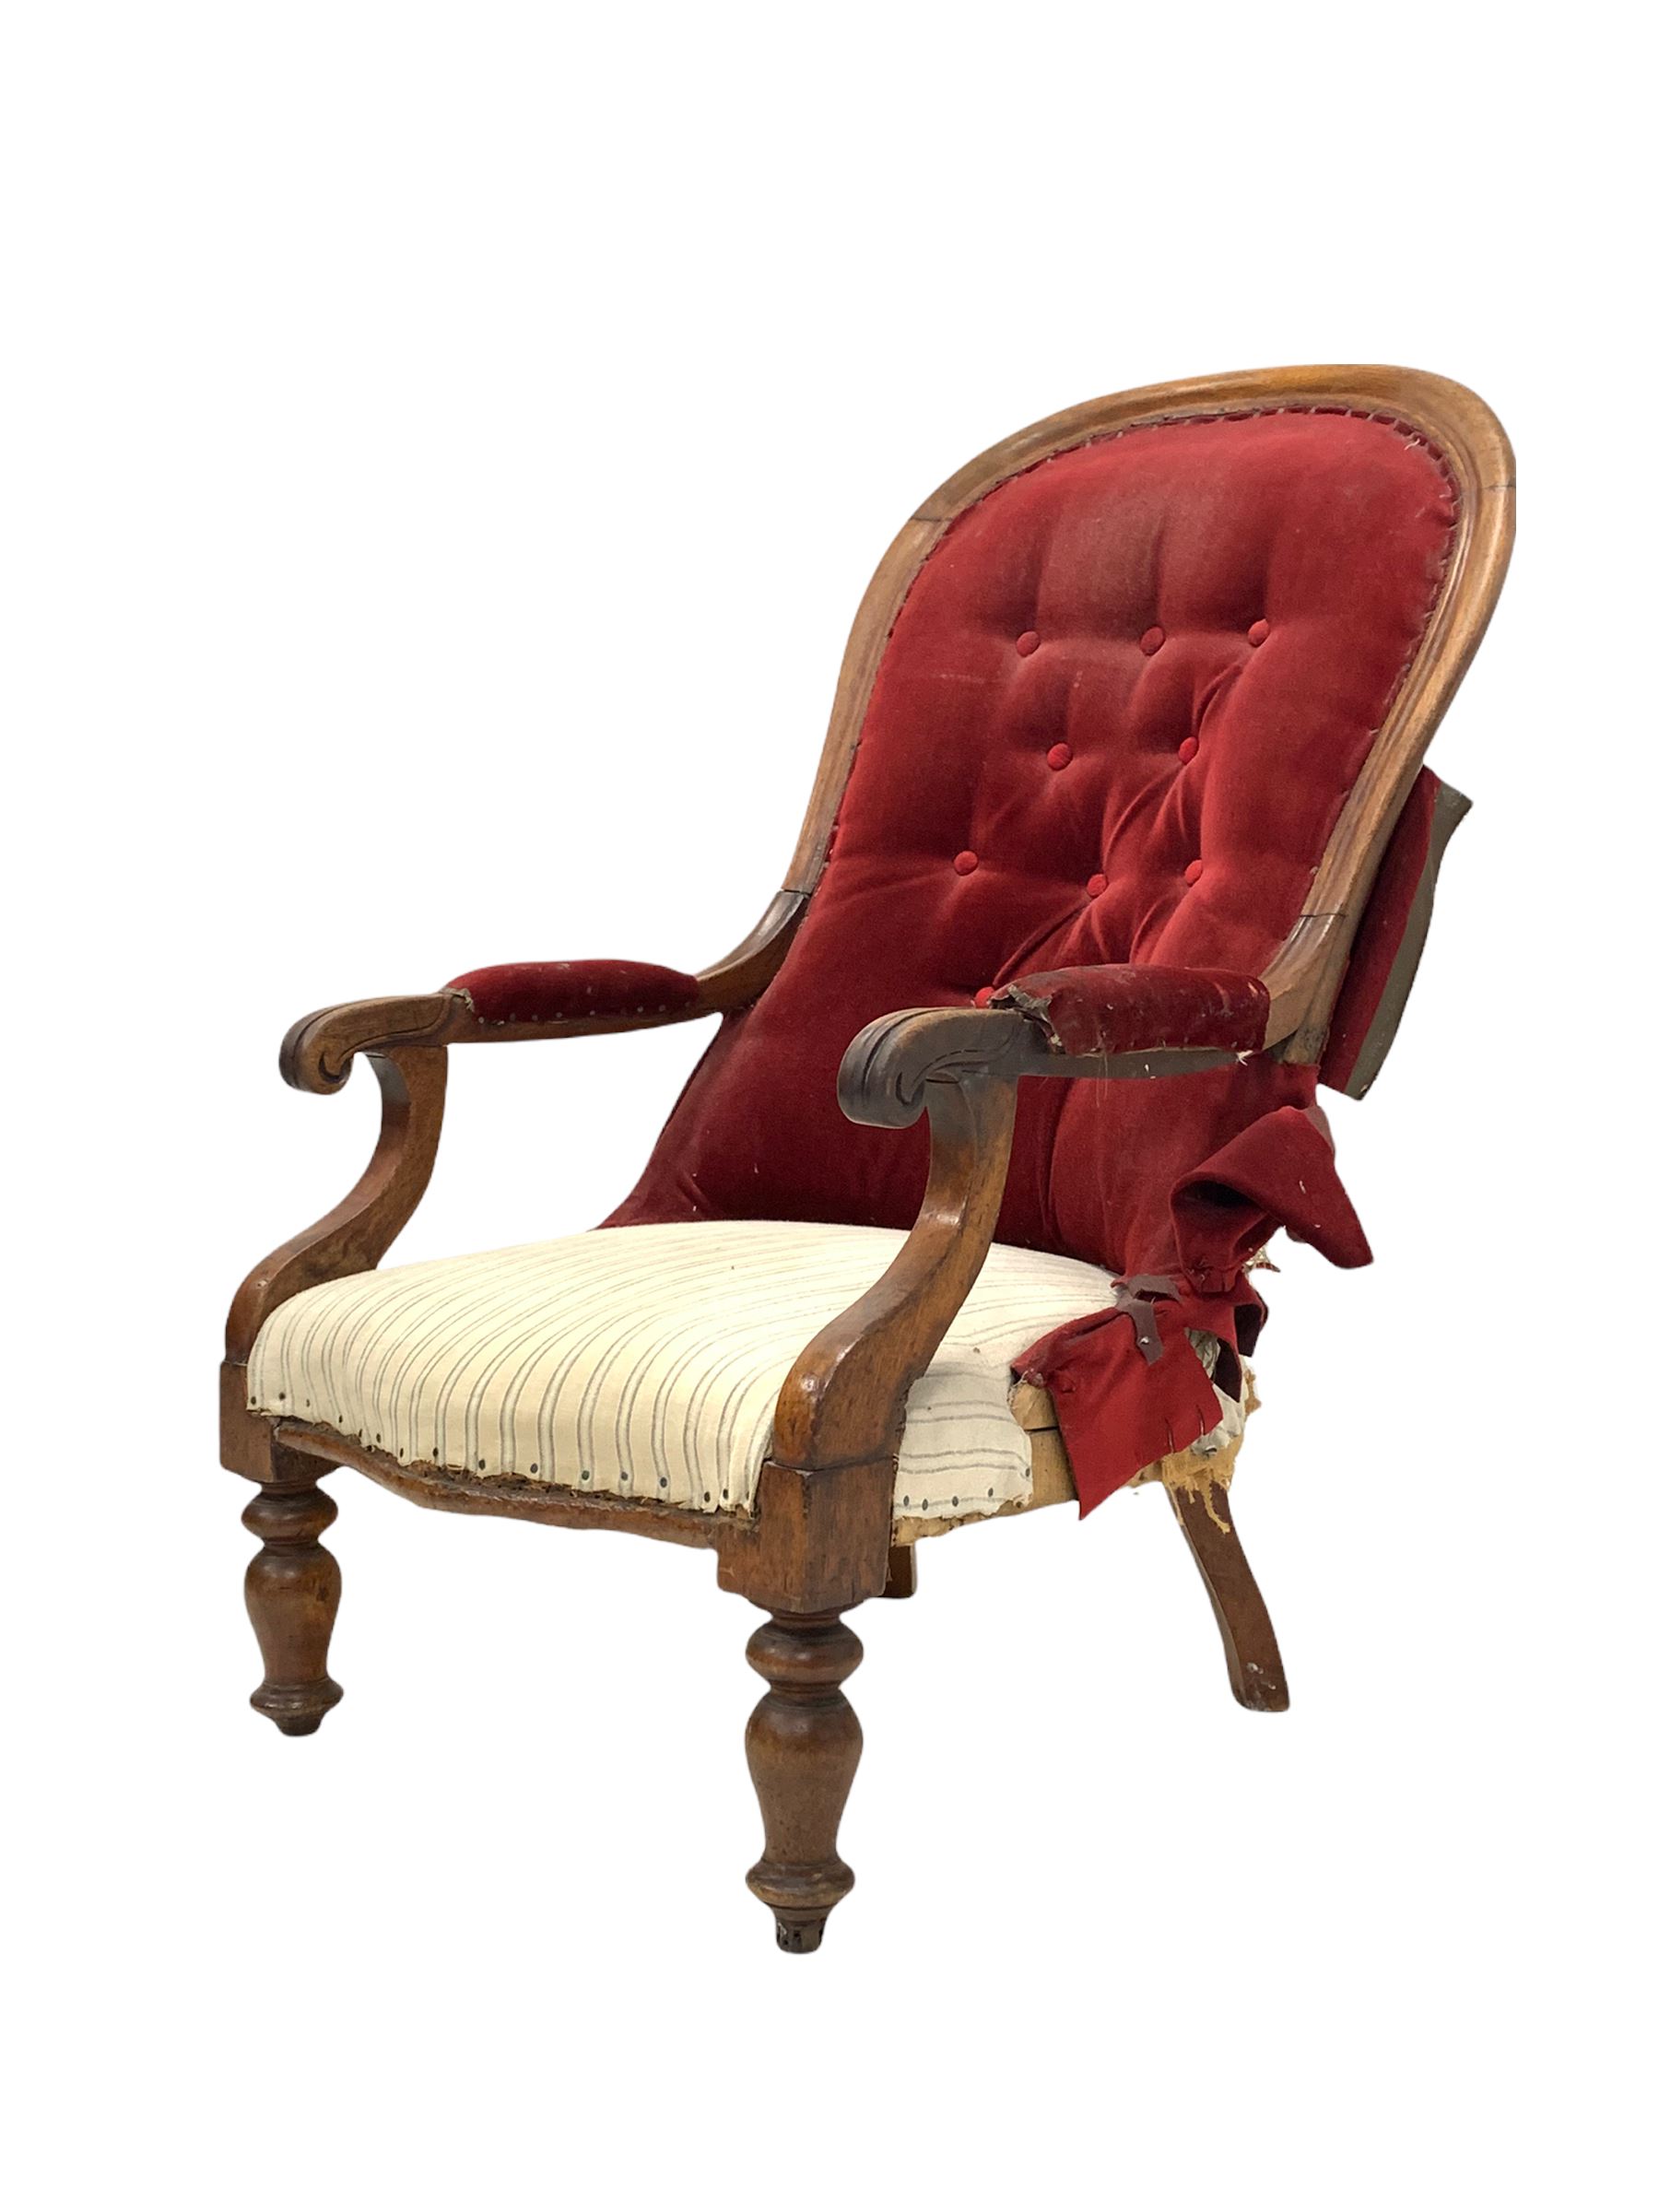 Victorian spoon back armchair - Image 2 of 3